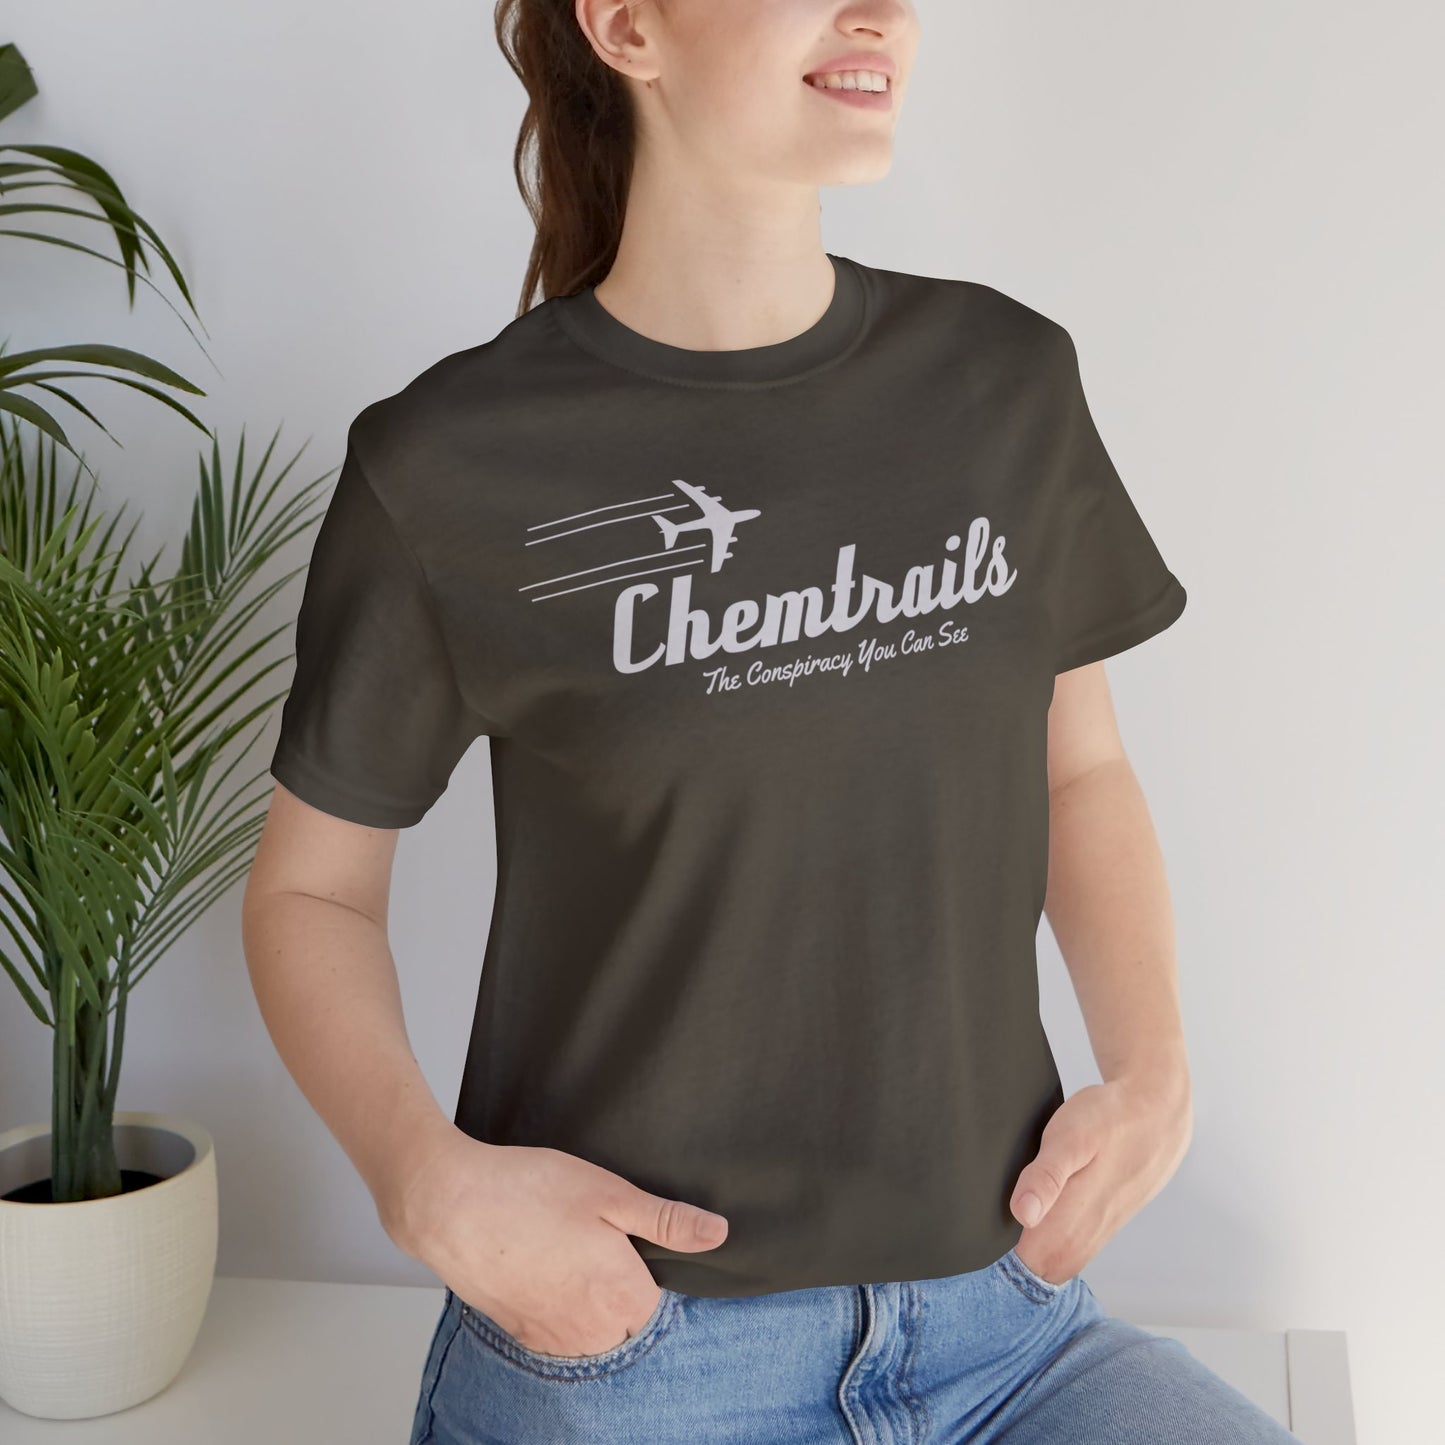 Chemtrails The Consipracy You Can See Unisex Jersey Short Sleeve Tee